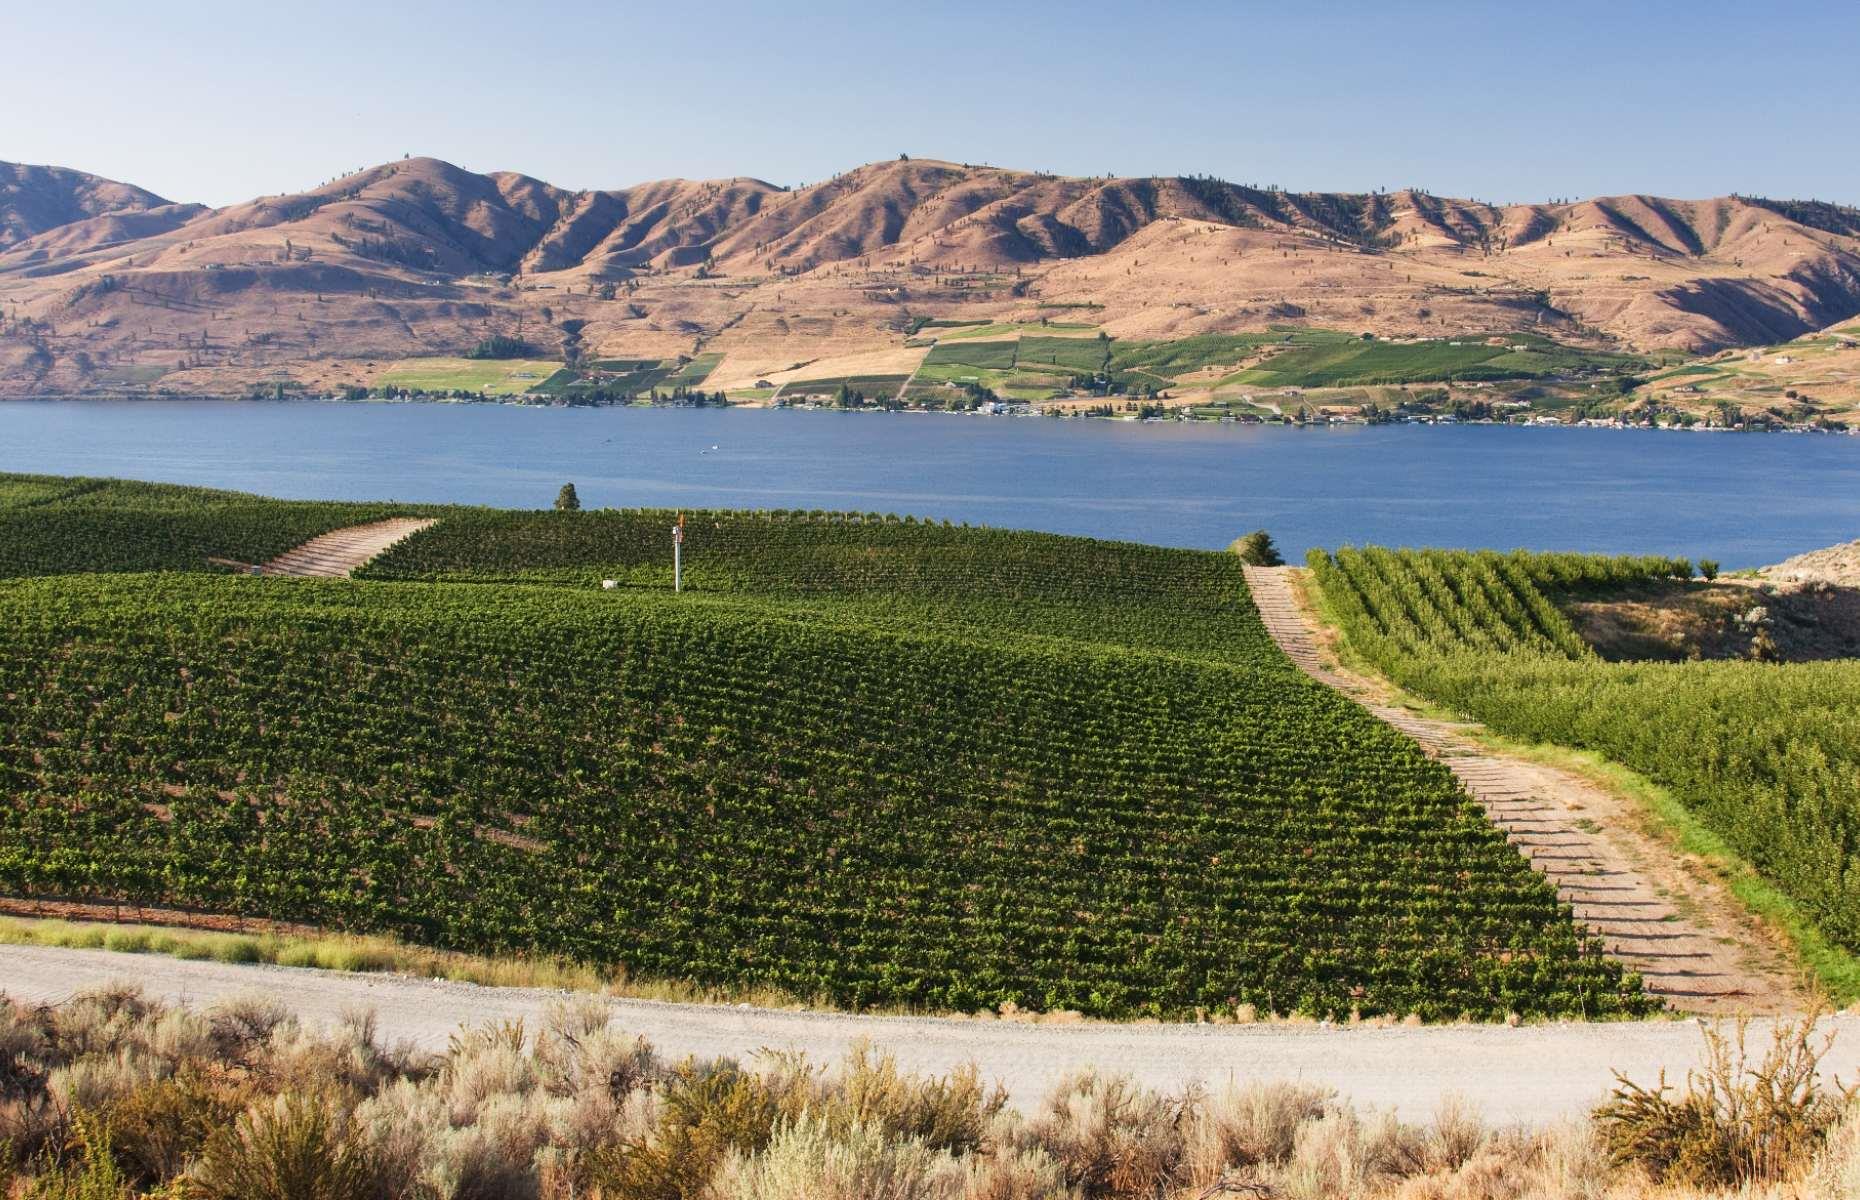 <p>To take in the best that Washington’s Lake Chelan region has to offer, make a beeline for <a href="https://cairdeaswinery.com/">Cairdeas Winery</a> which sits on the lake’s stunning north shore near Manson. The influence of France’s Rhône Valley is evident here: Viognier, Roussanne and Picpoul grapes combine to create a range of traditional blends, which can all be sampled in the lakefront tasting room. Opt for a $15 tasting flight (the price is waived if you buy two bottles) and enjoy a selection of charcuterie, cheese boards and snacks to go with it. </p>